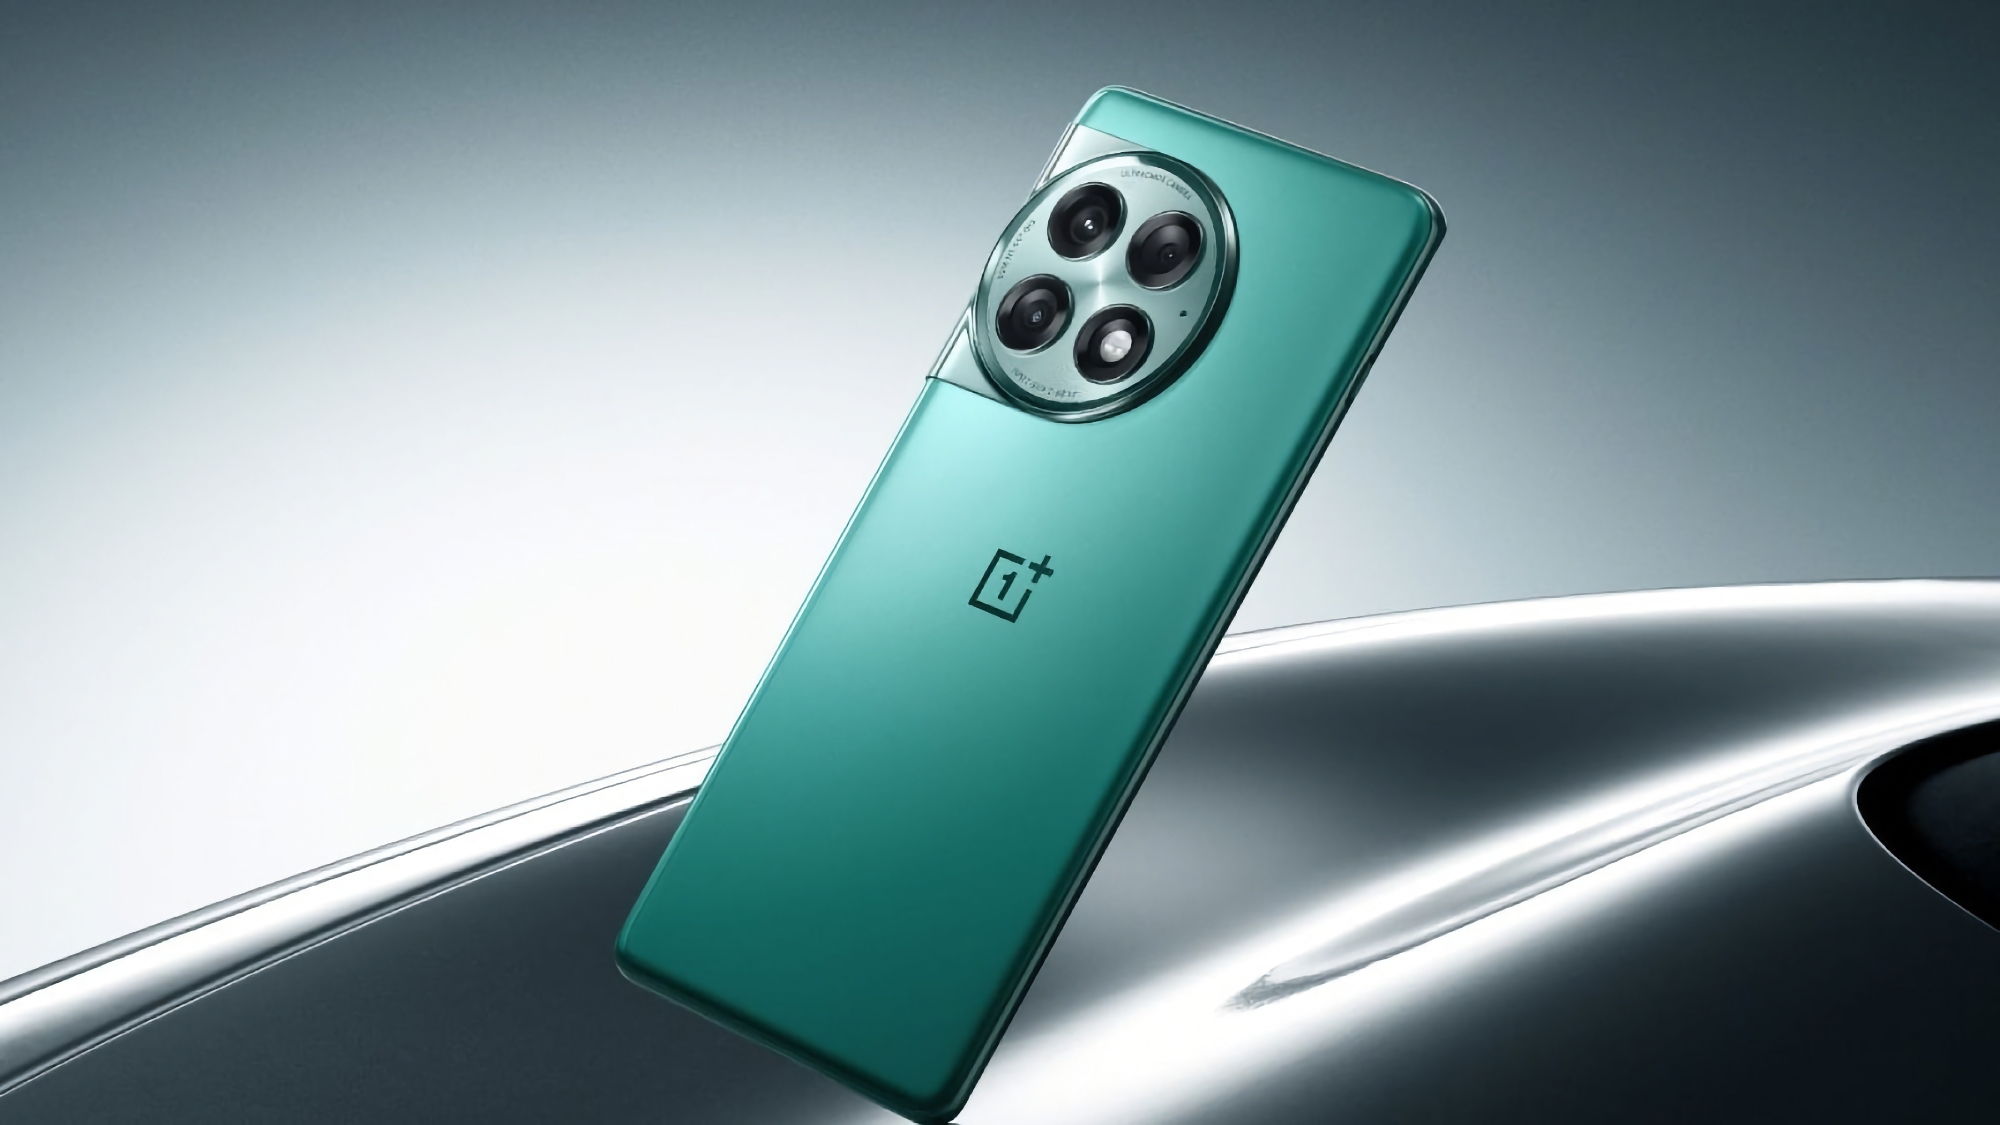 Ceramic, glass and leather: insider reveals what body materials OnePlus Ace 3 Pro will receive